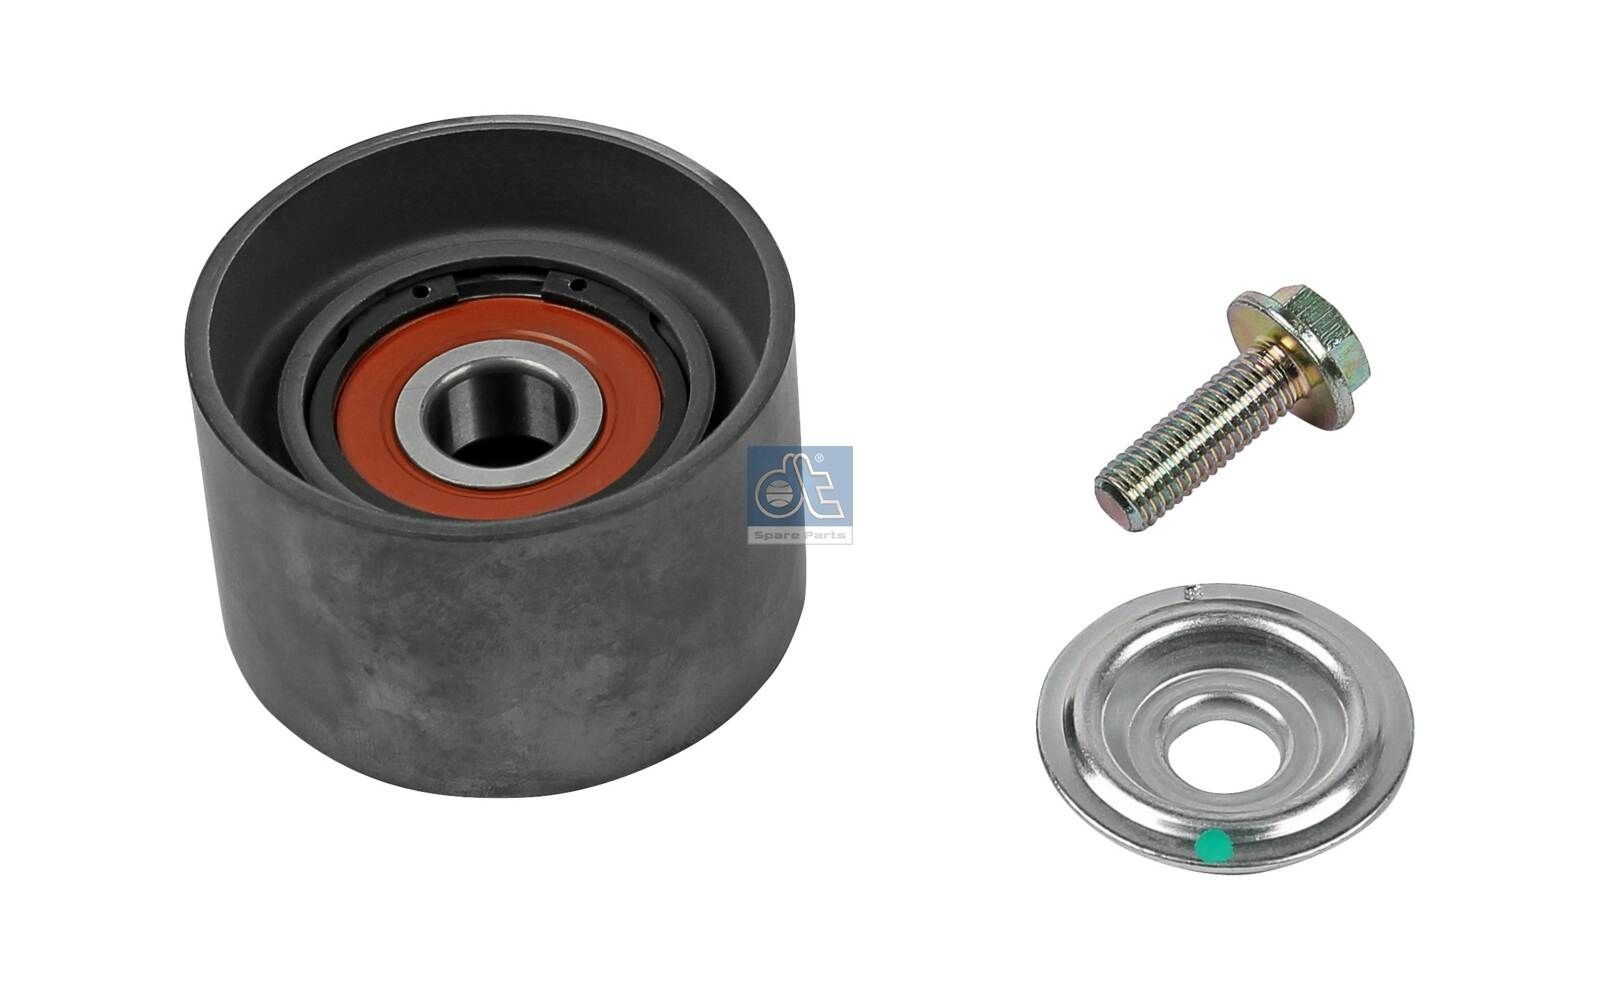 Mercedes-Benz C-Class Tensioner Pulley, V-belt DT Spare Parts 4.63792 cheap